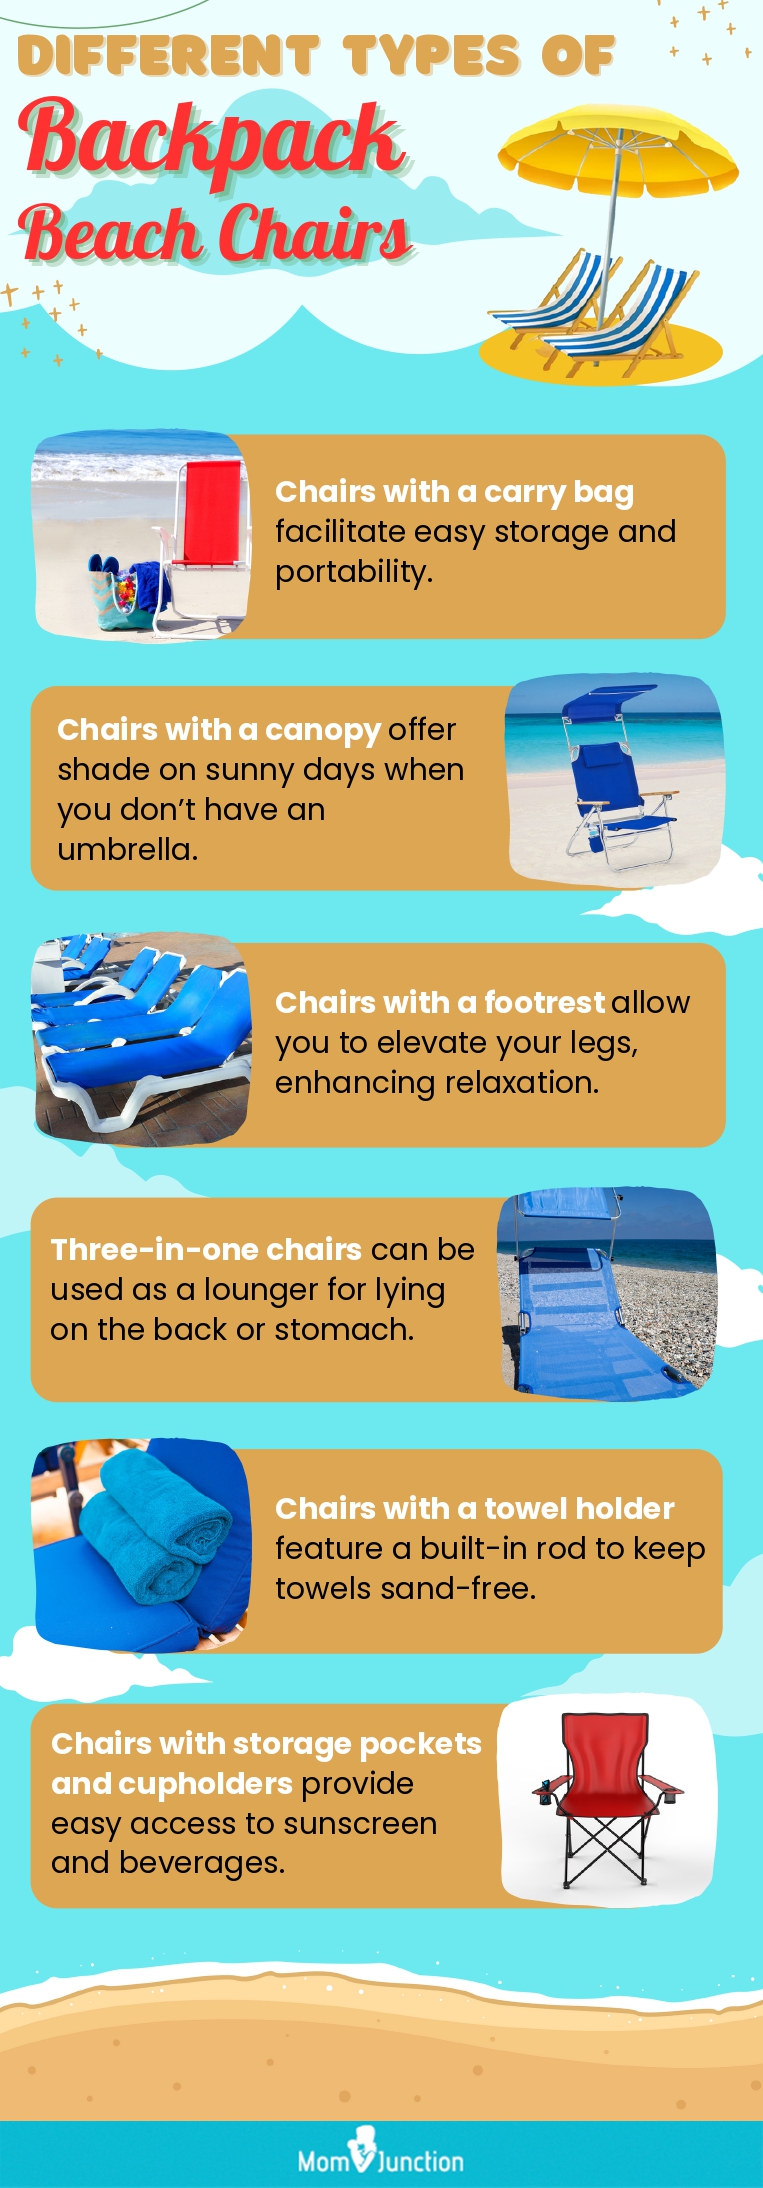 Different Types Of Backpack Beach Chairs (infographic)